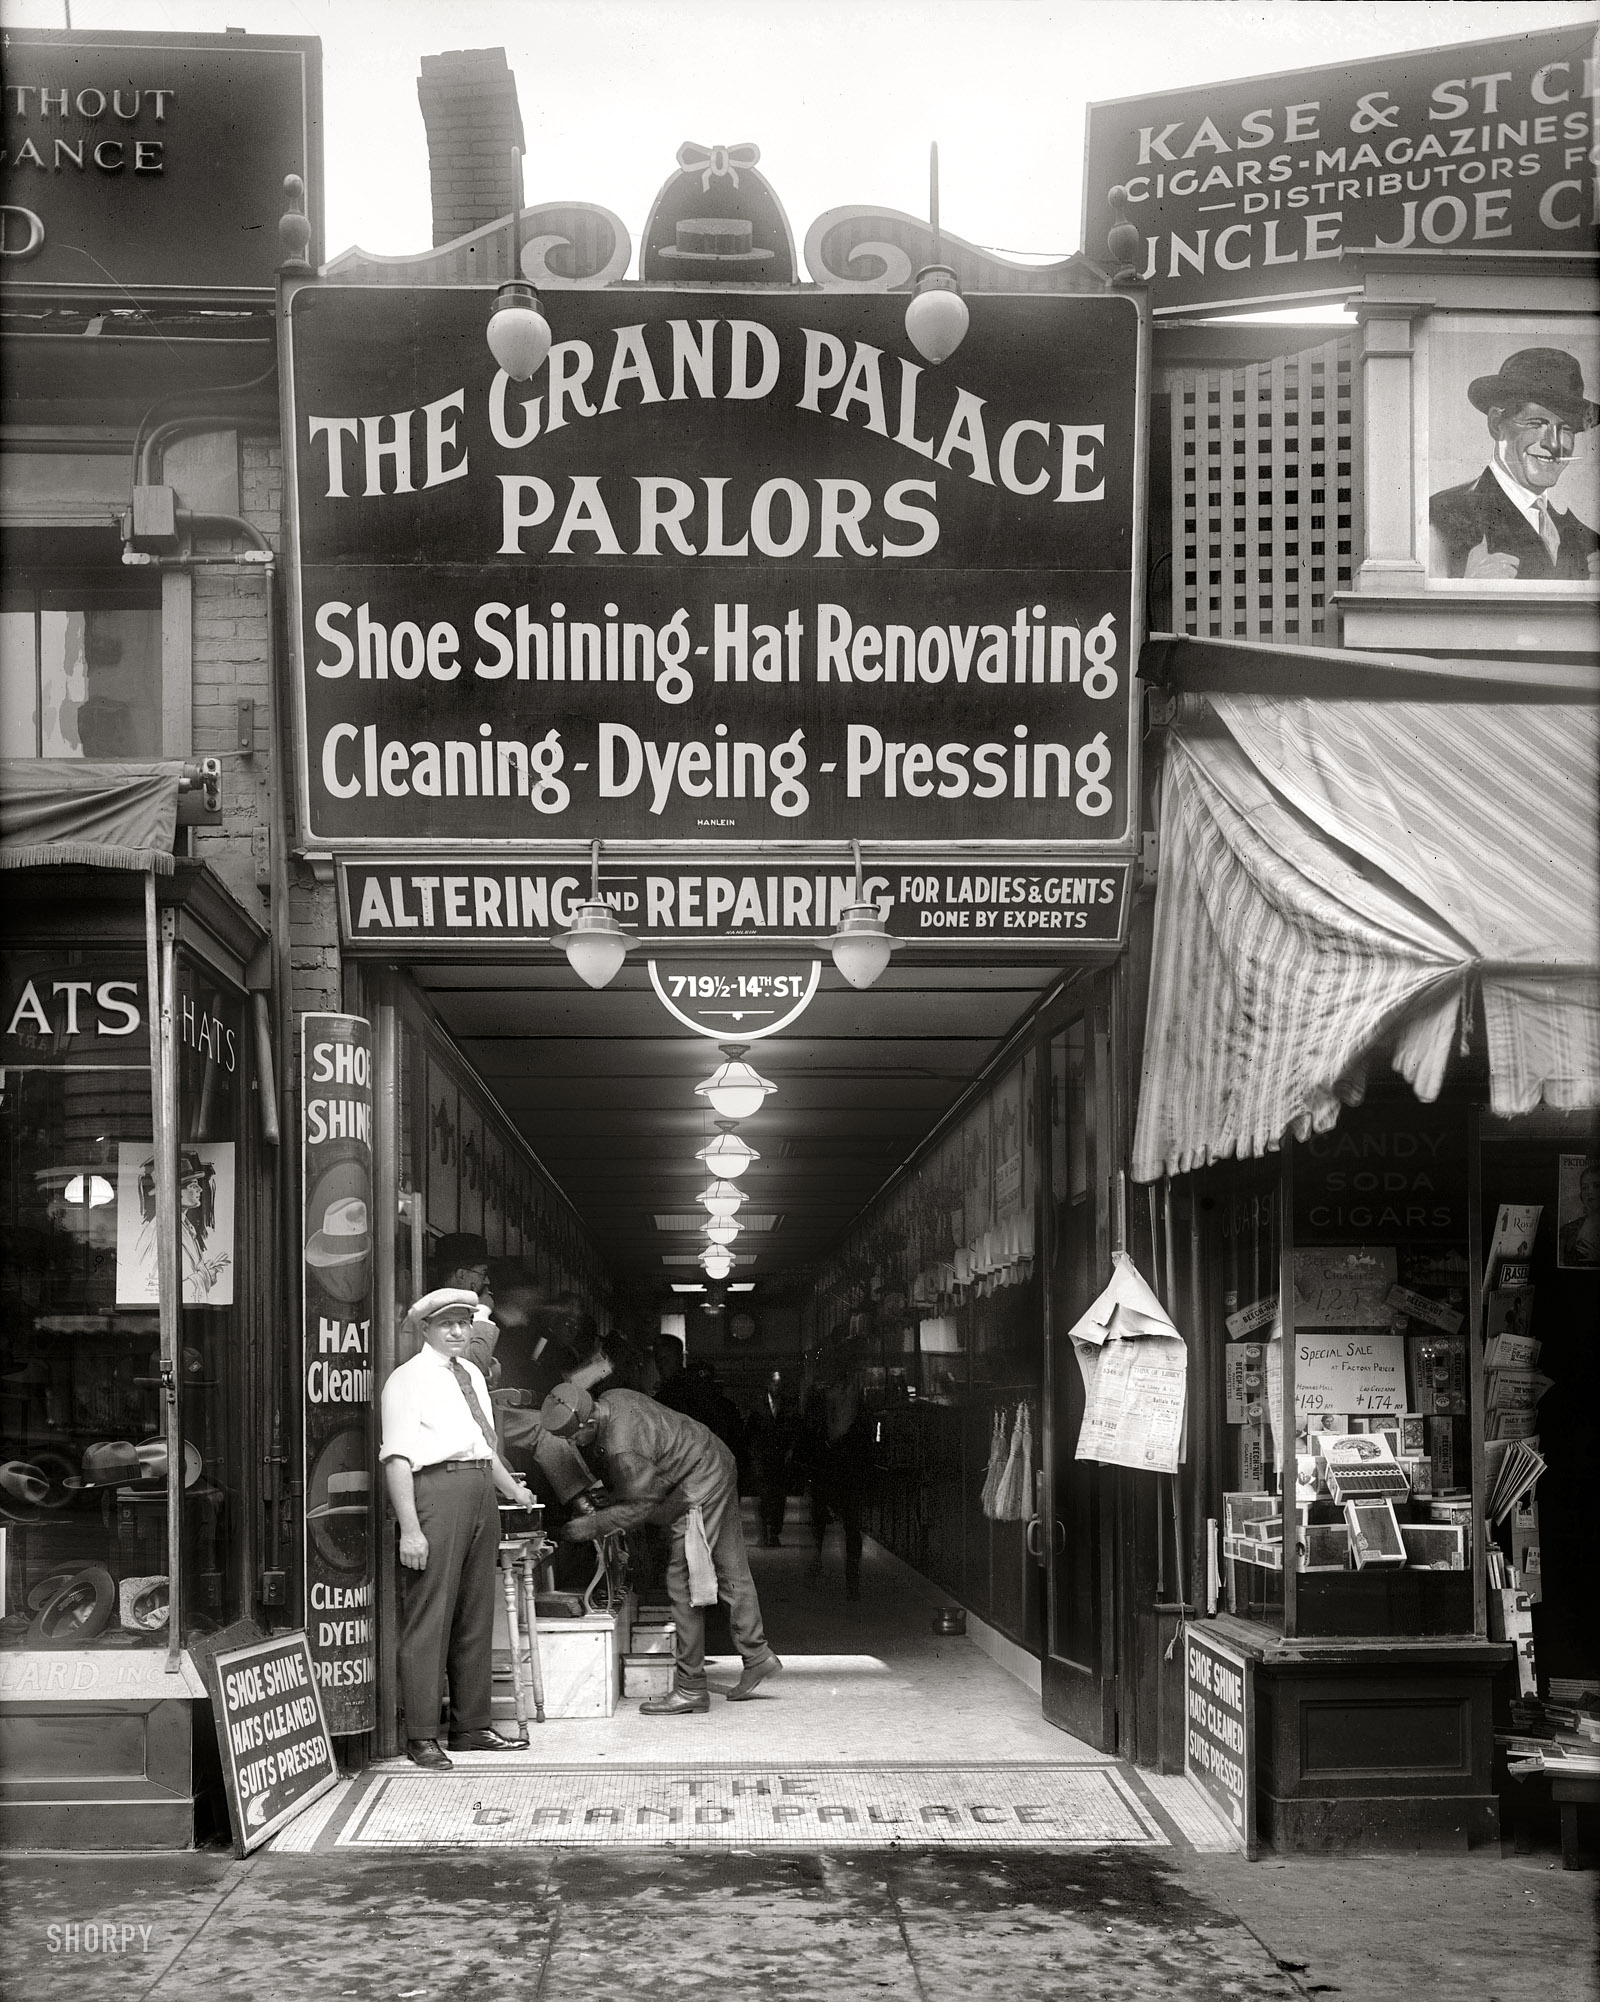 Washington circa 1921. "Grand Palace shoe shining parlor, 719½ 14th St. N.W." National Photo Company Collection glass negative. View full size.